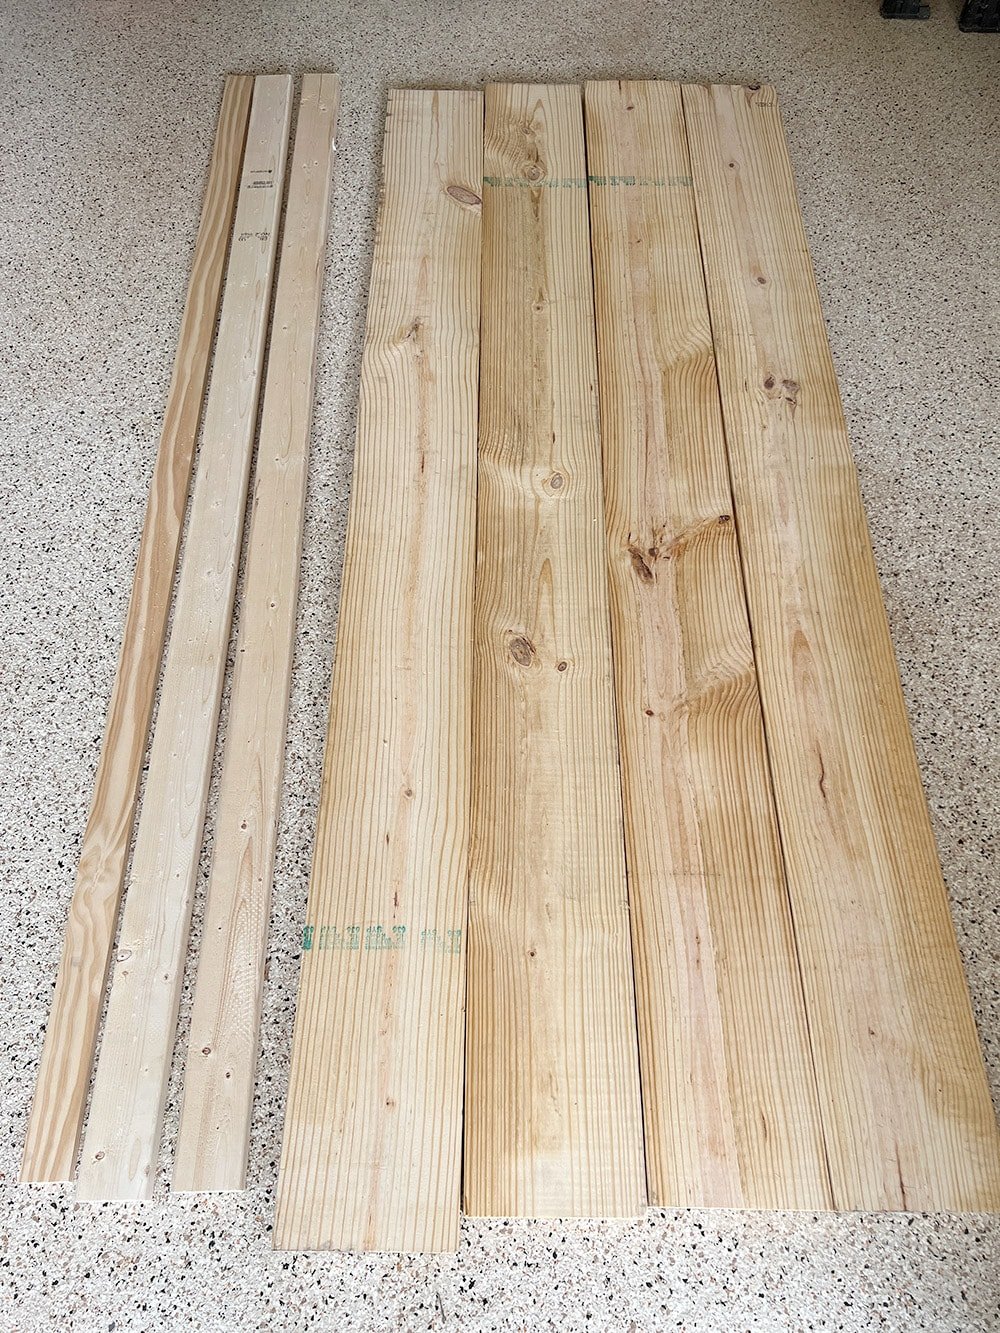 pine Lumber to build a coffee table